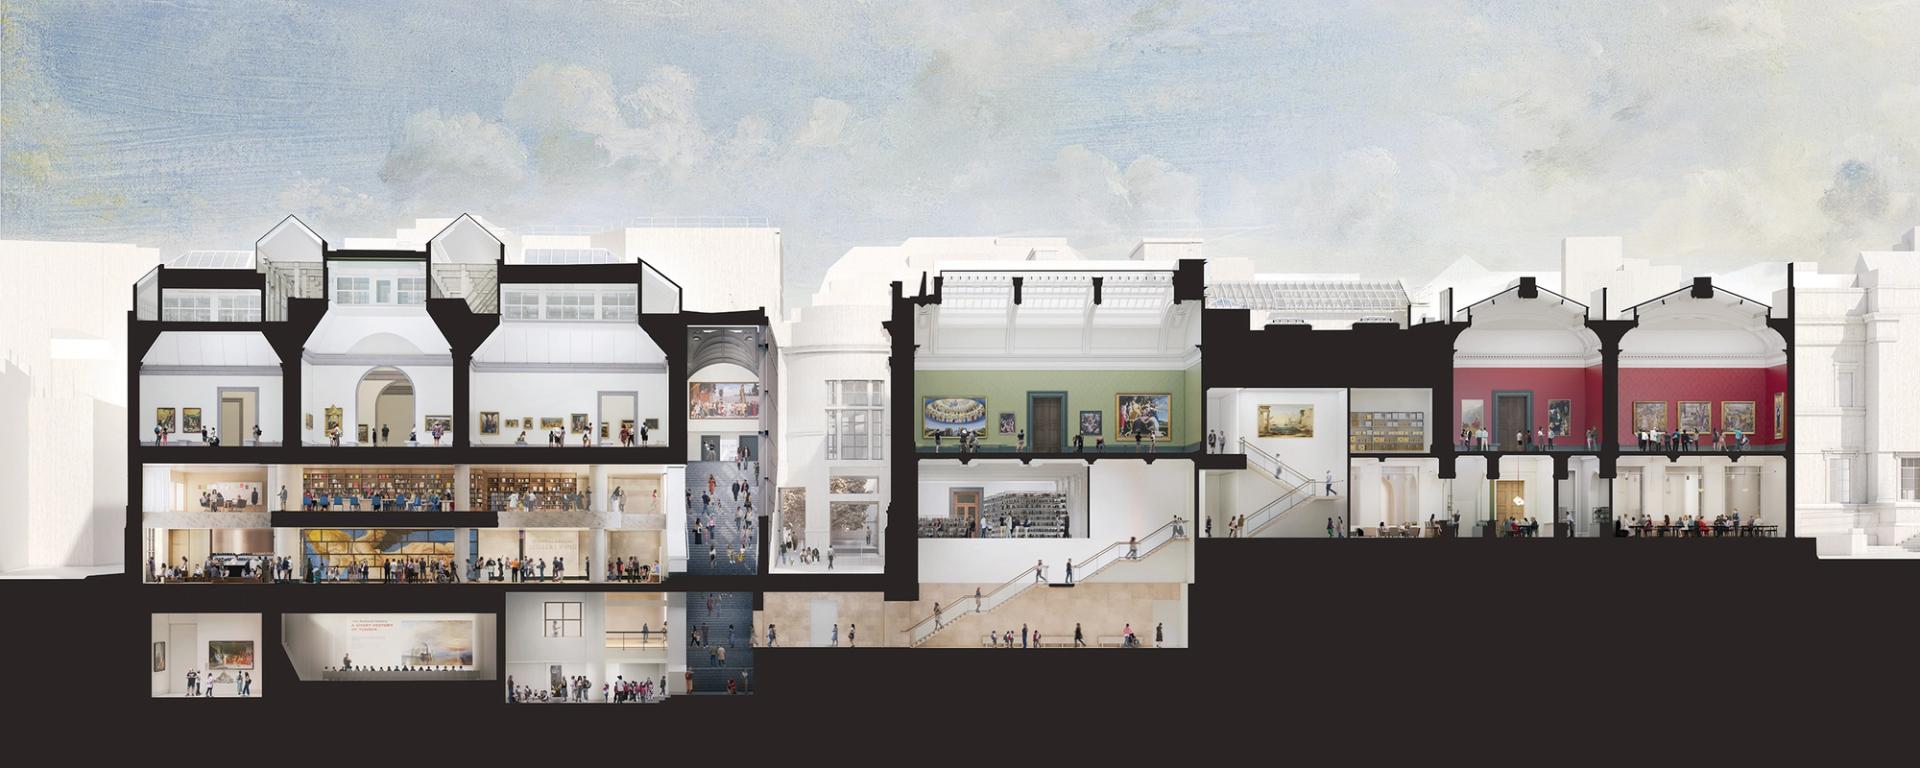 A cross-section of the National Gallery showing the proposed new spaces. ©Hayes Davidson